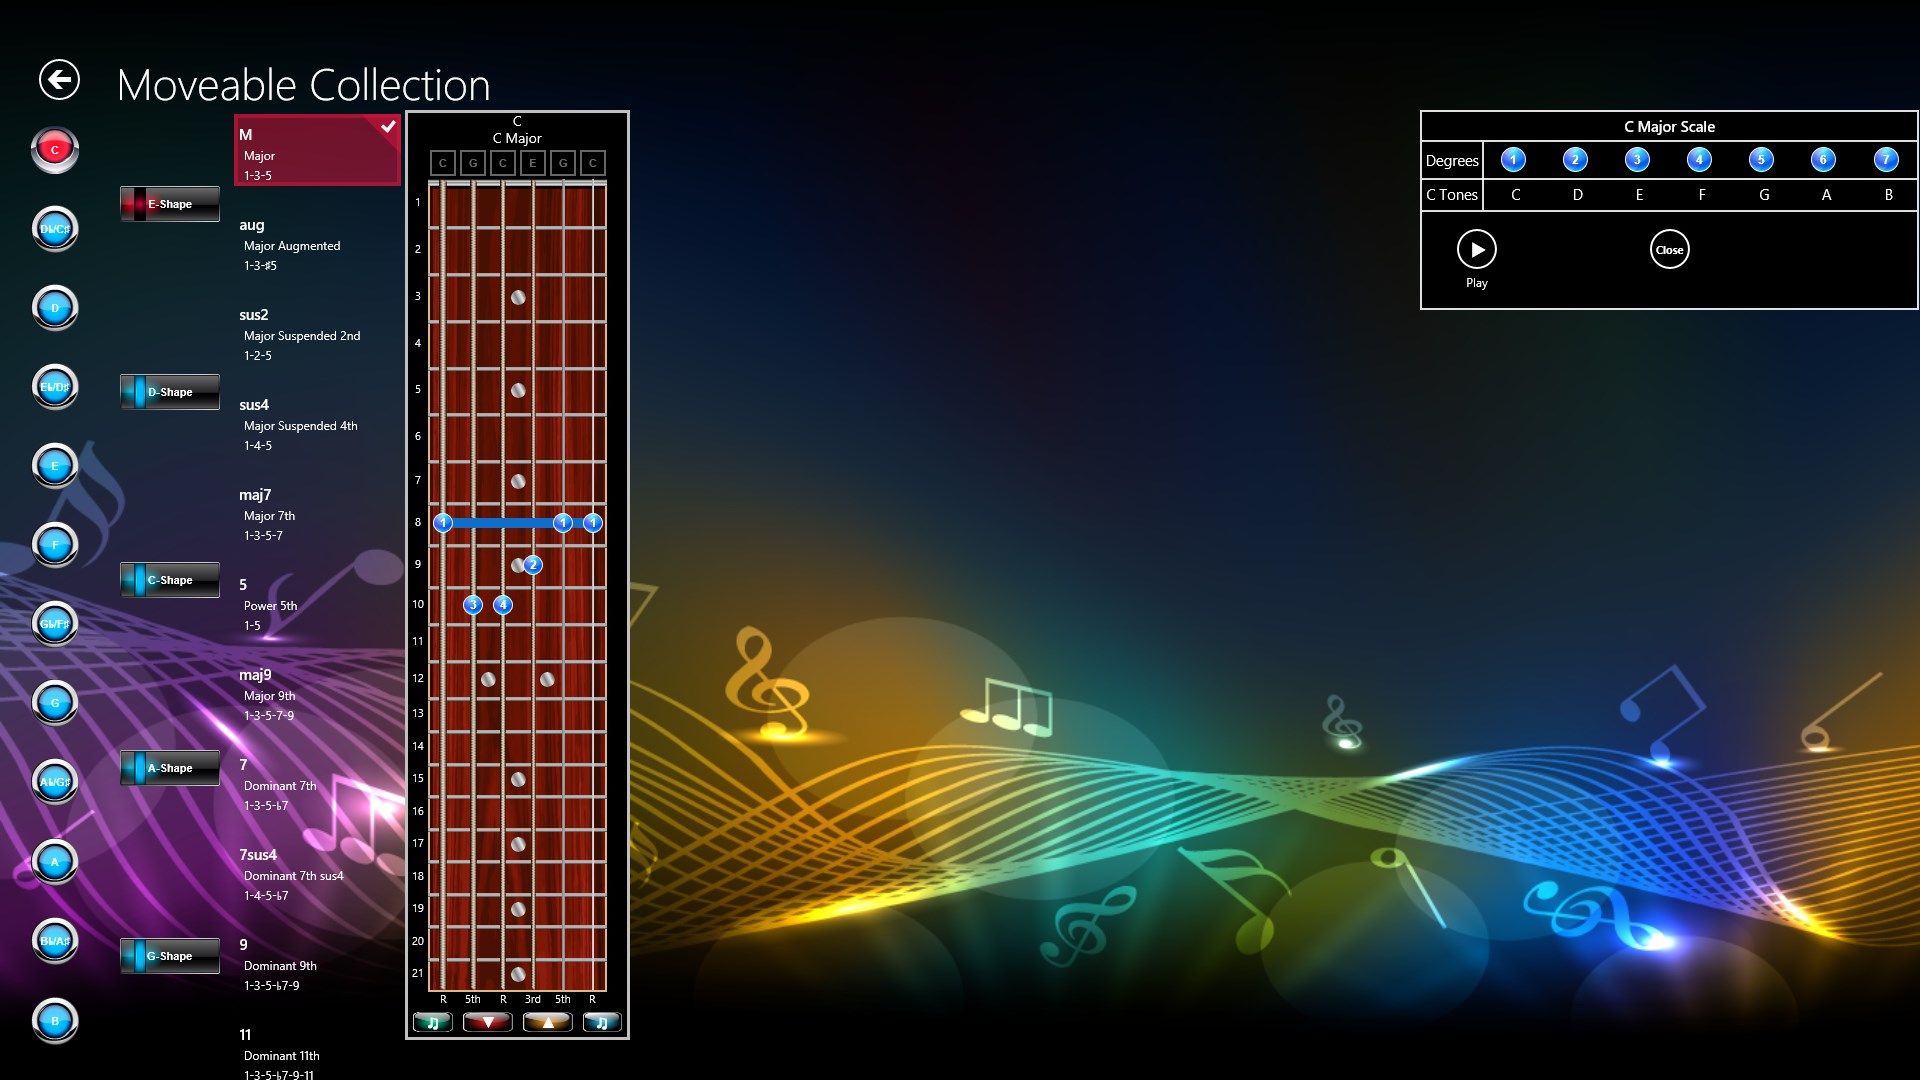 The fretboard view offers chord search by root tone and chord shape (CAGED System) and includes all of the same information and playback features as seen in the chord box views